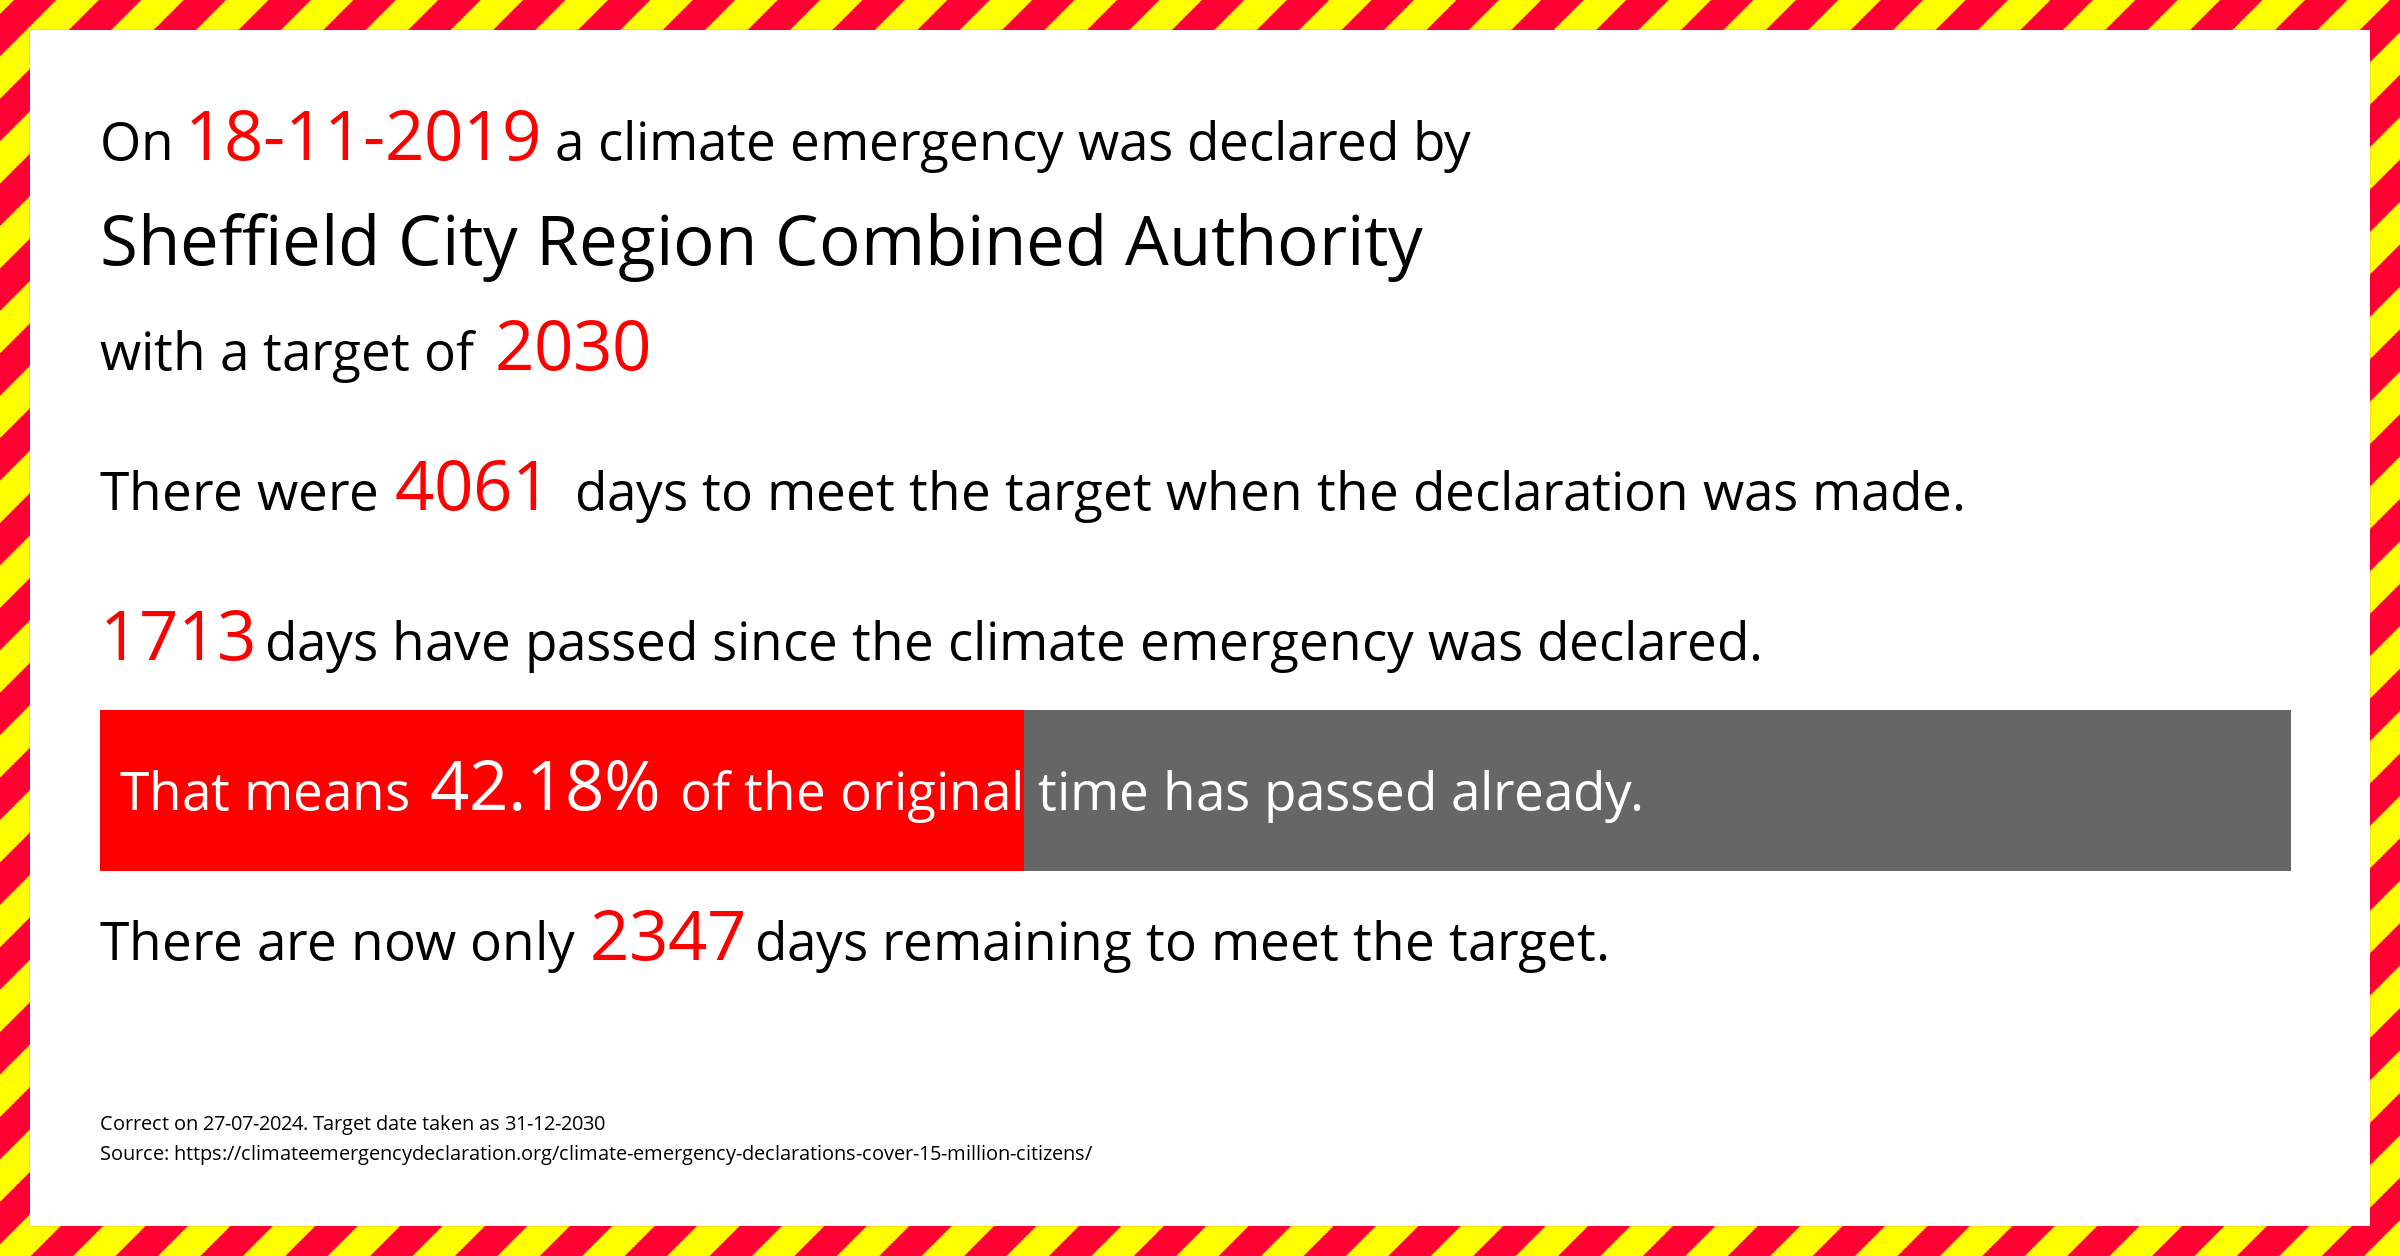 Sheffield City Region Combined Authority declared a Climate emergency on Monday 18th November 2019, with a target of 2030.